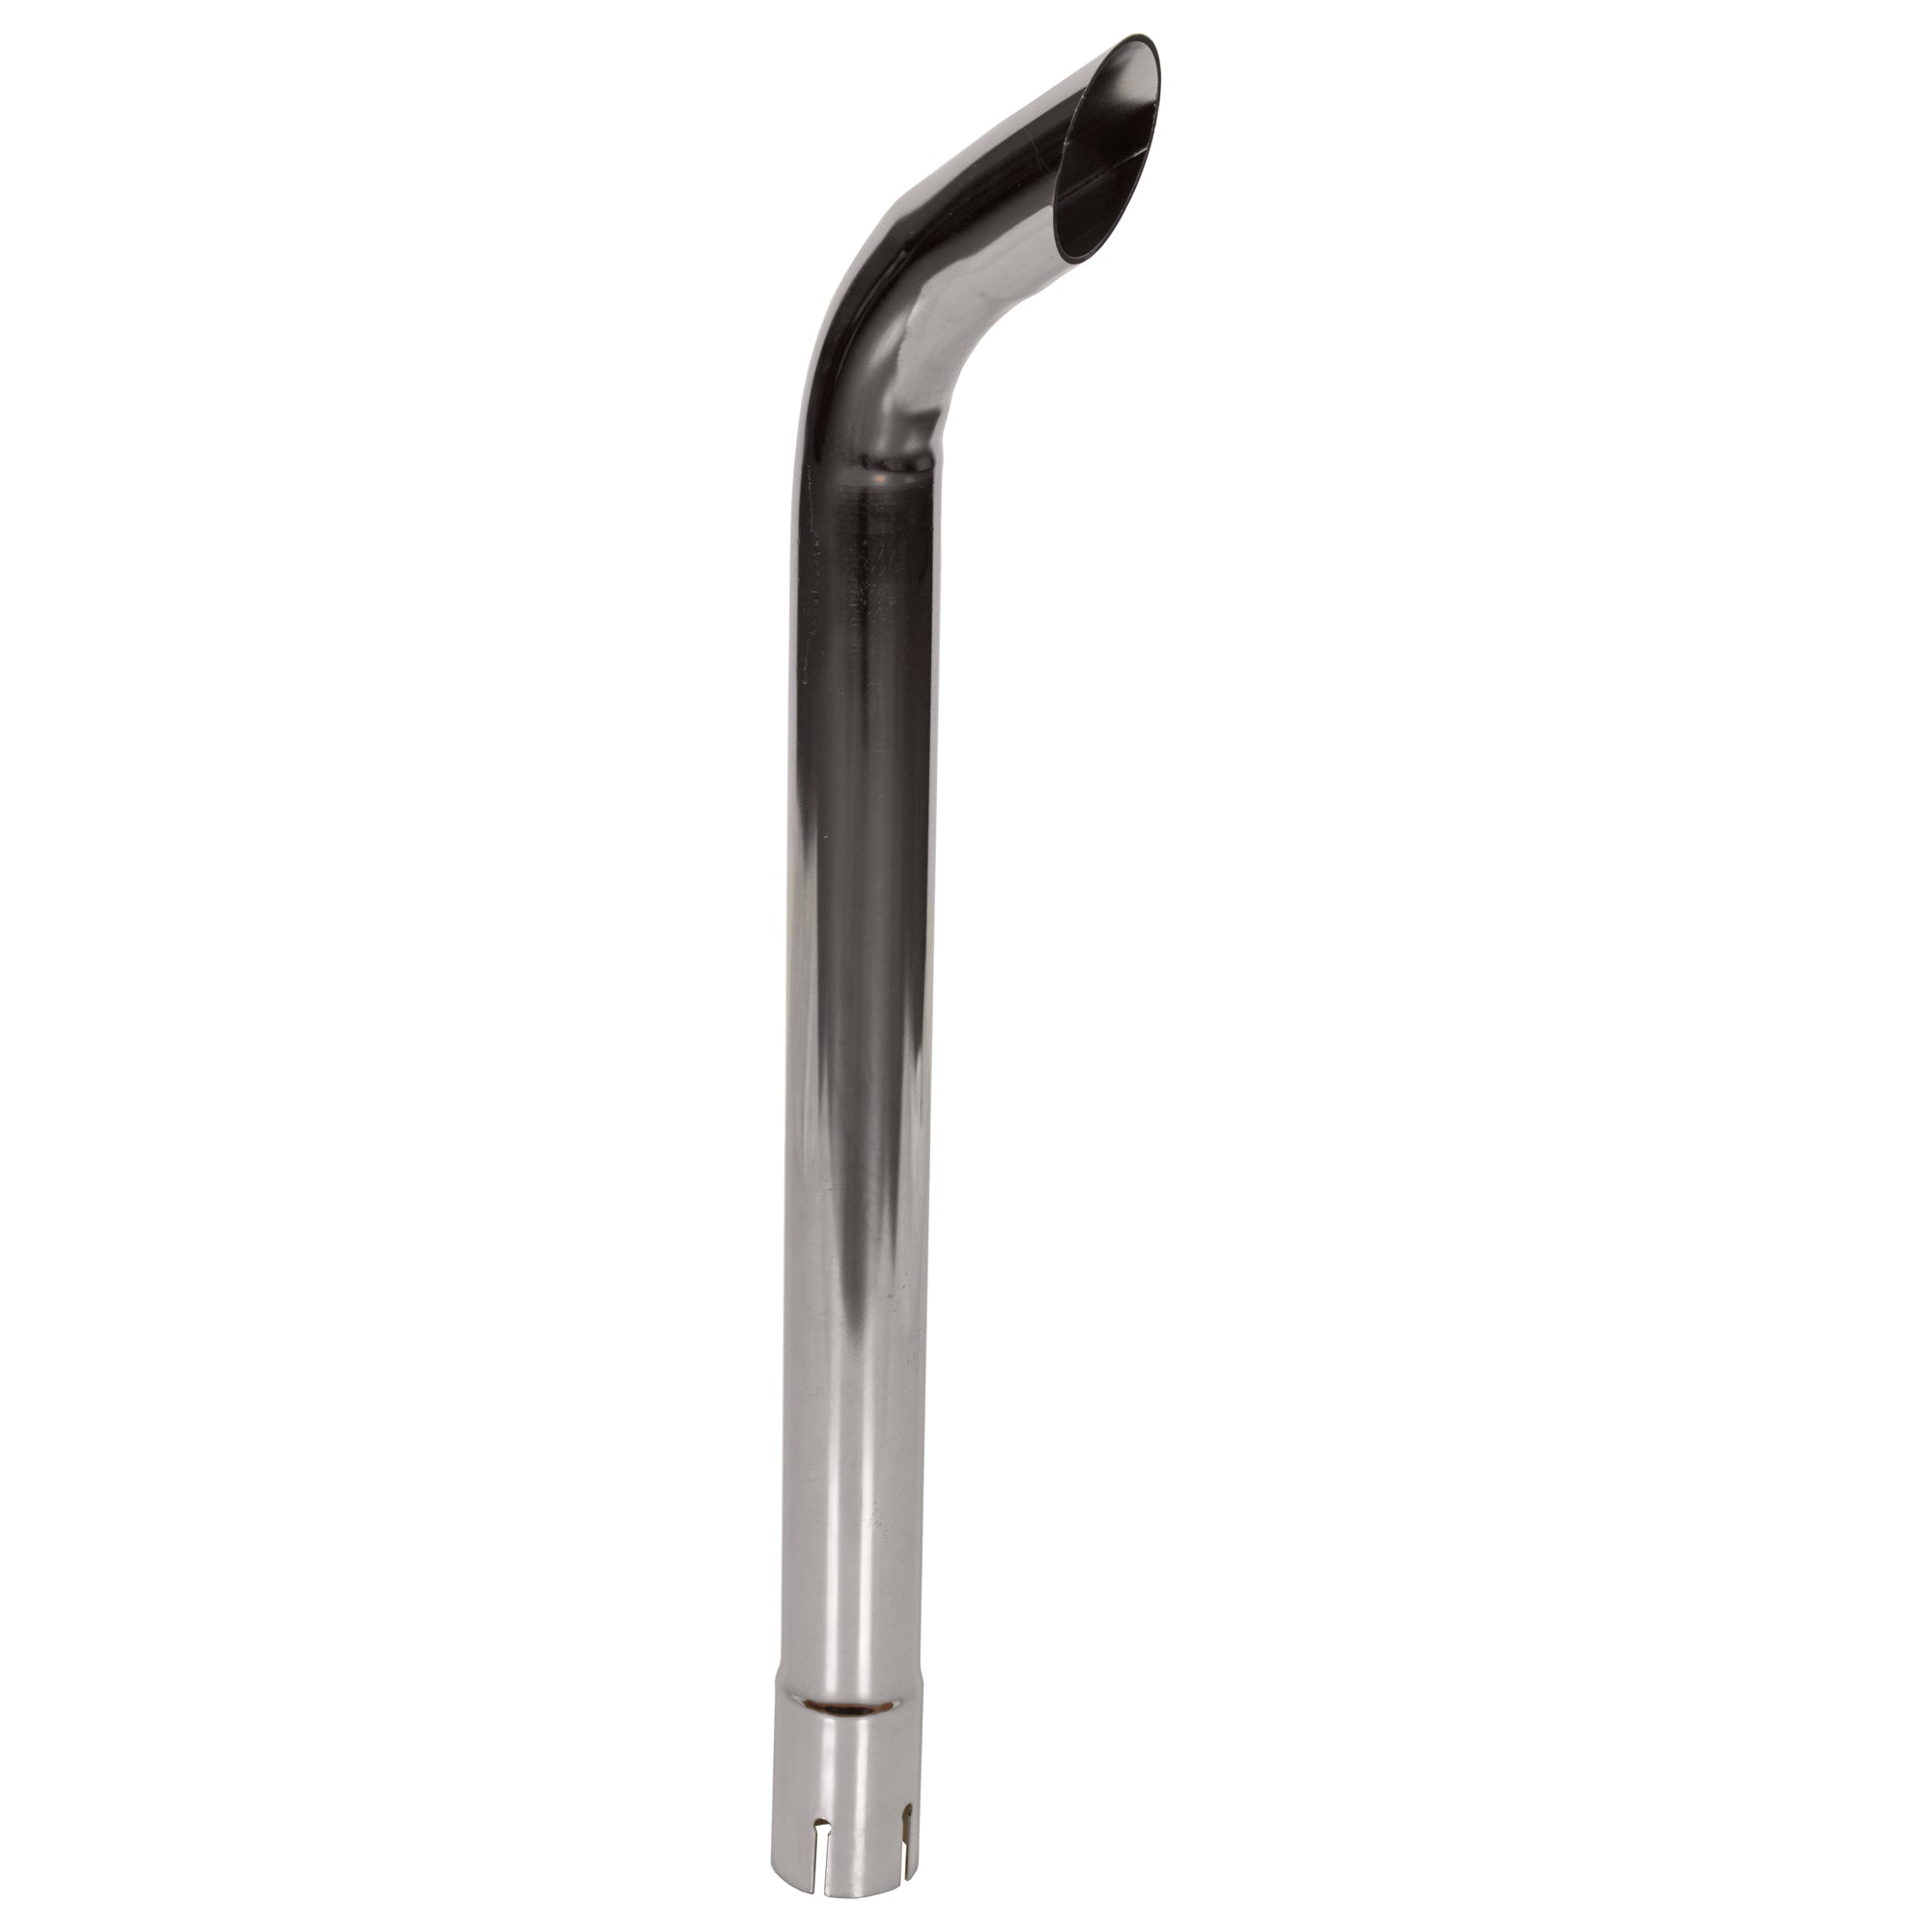 Exhaust Pipe Stack Replacement UNIVERSAL - 1-3/4" x 24", Curved Chrome